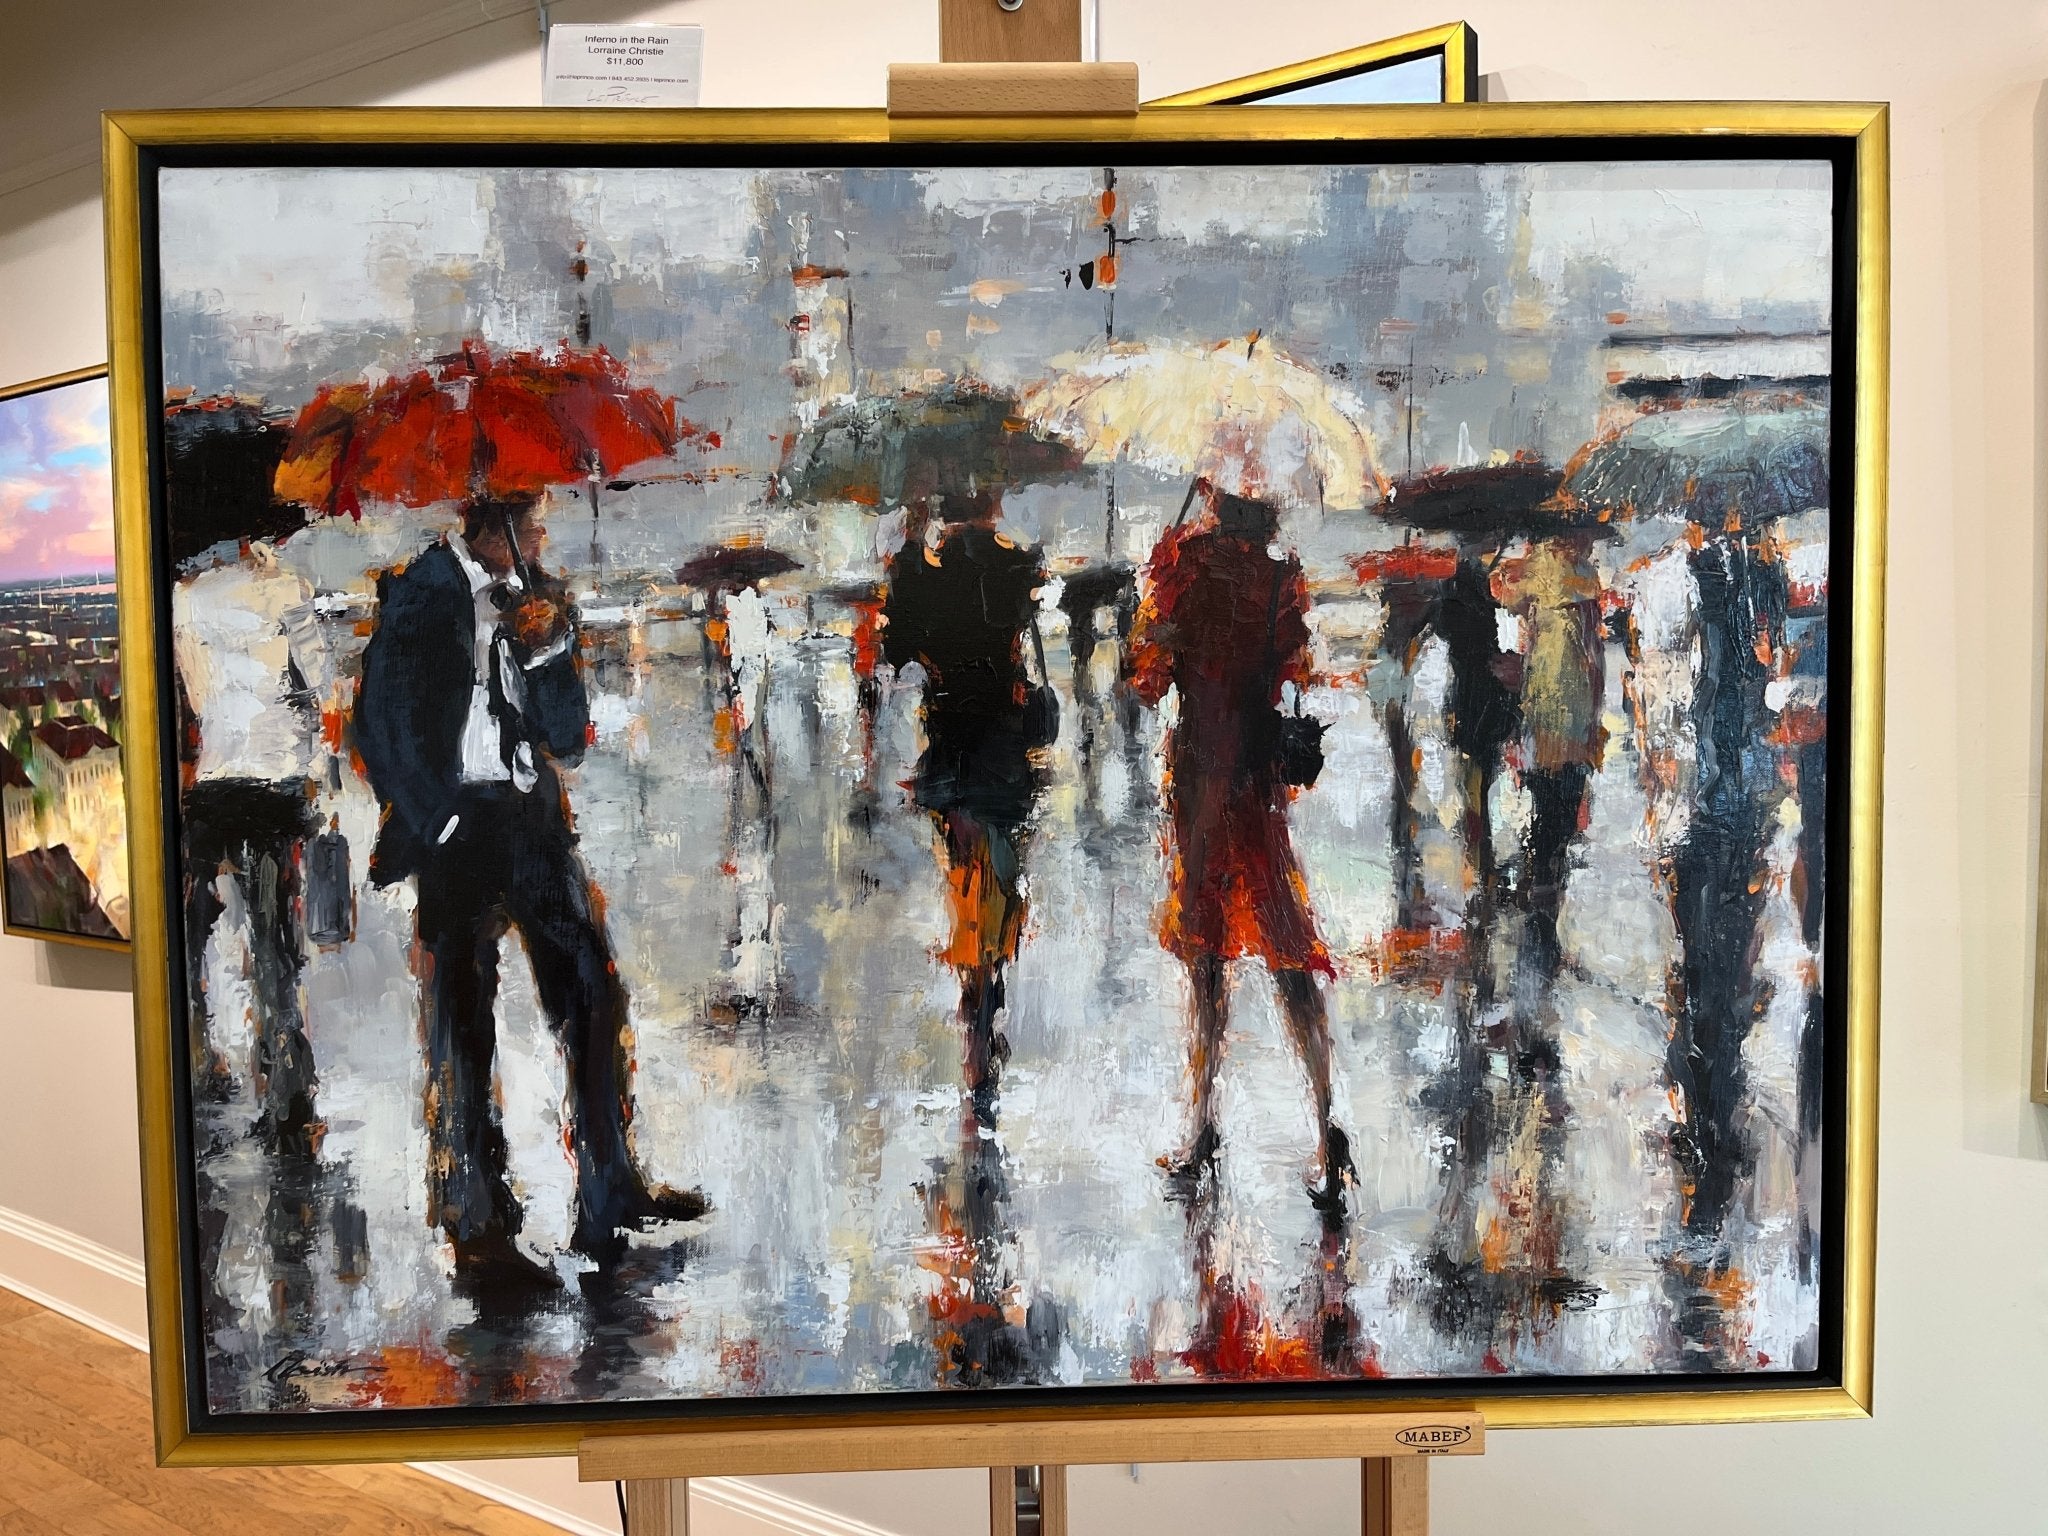 Inferno in the Rain by Lorraine Christie at LePrince Galleries